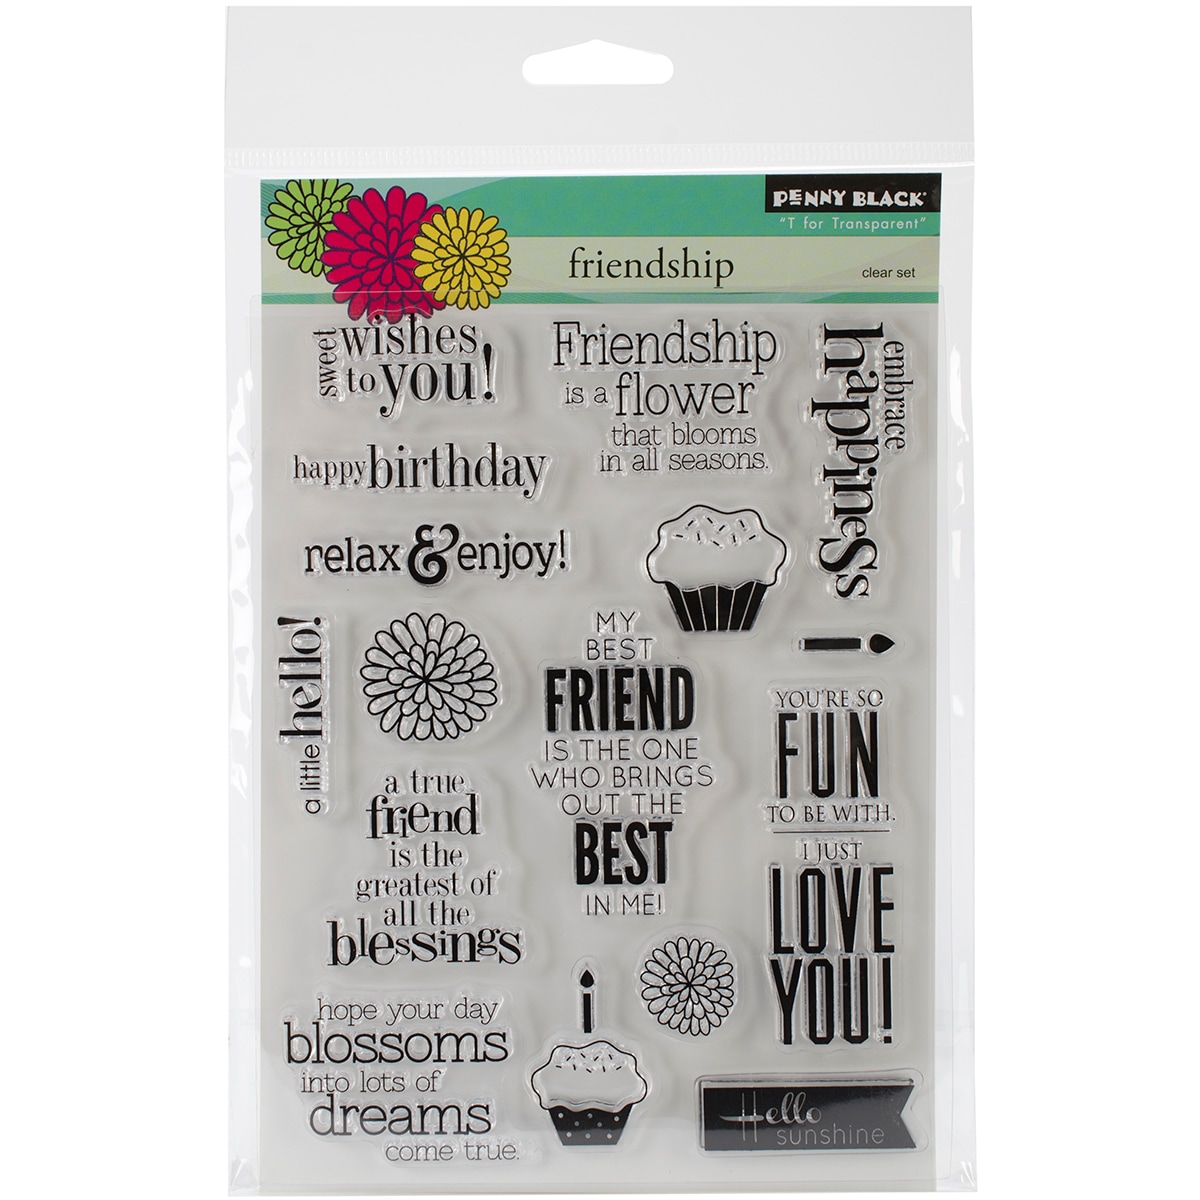 Penny Black Clear Stamps 5x6.5 Sheet friendship